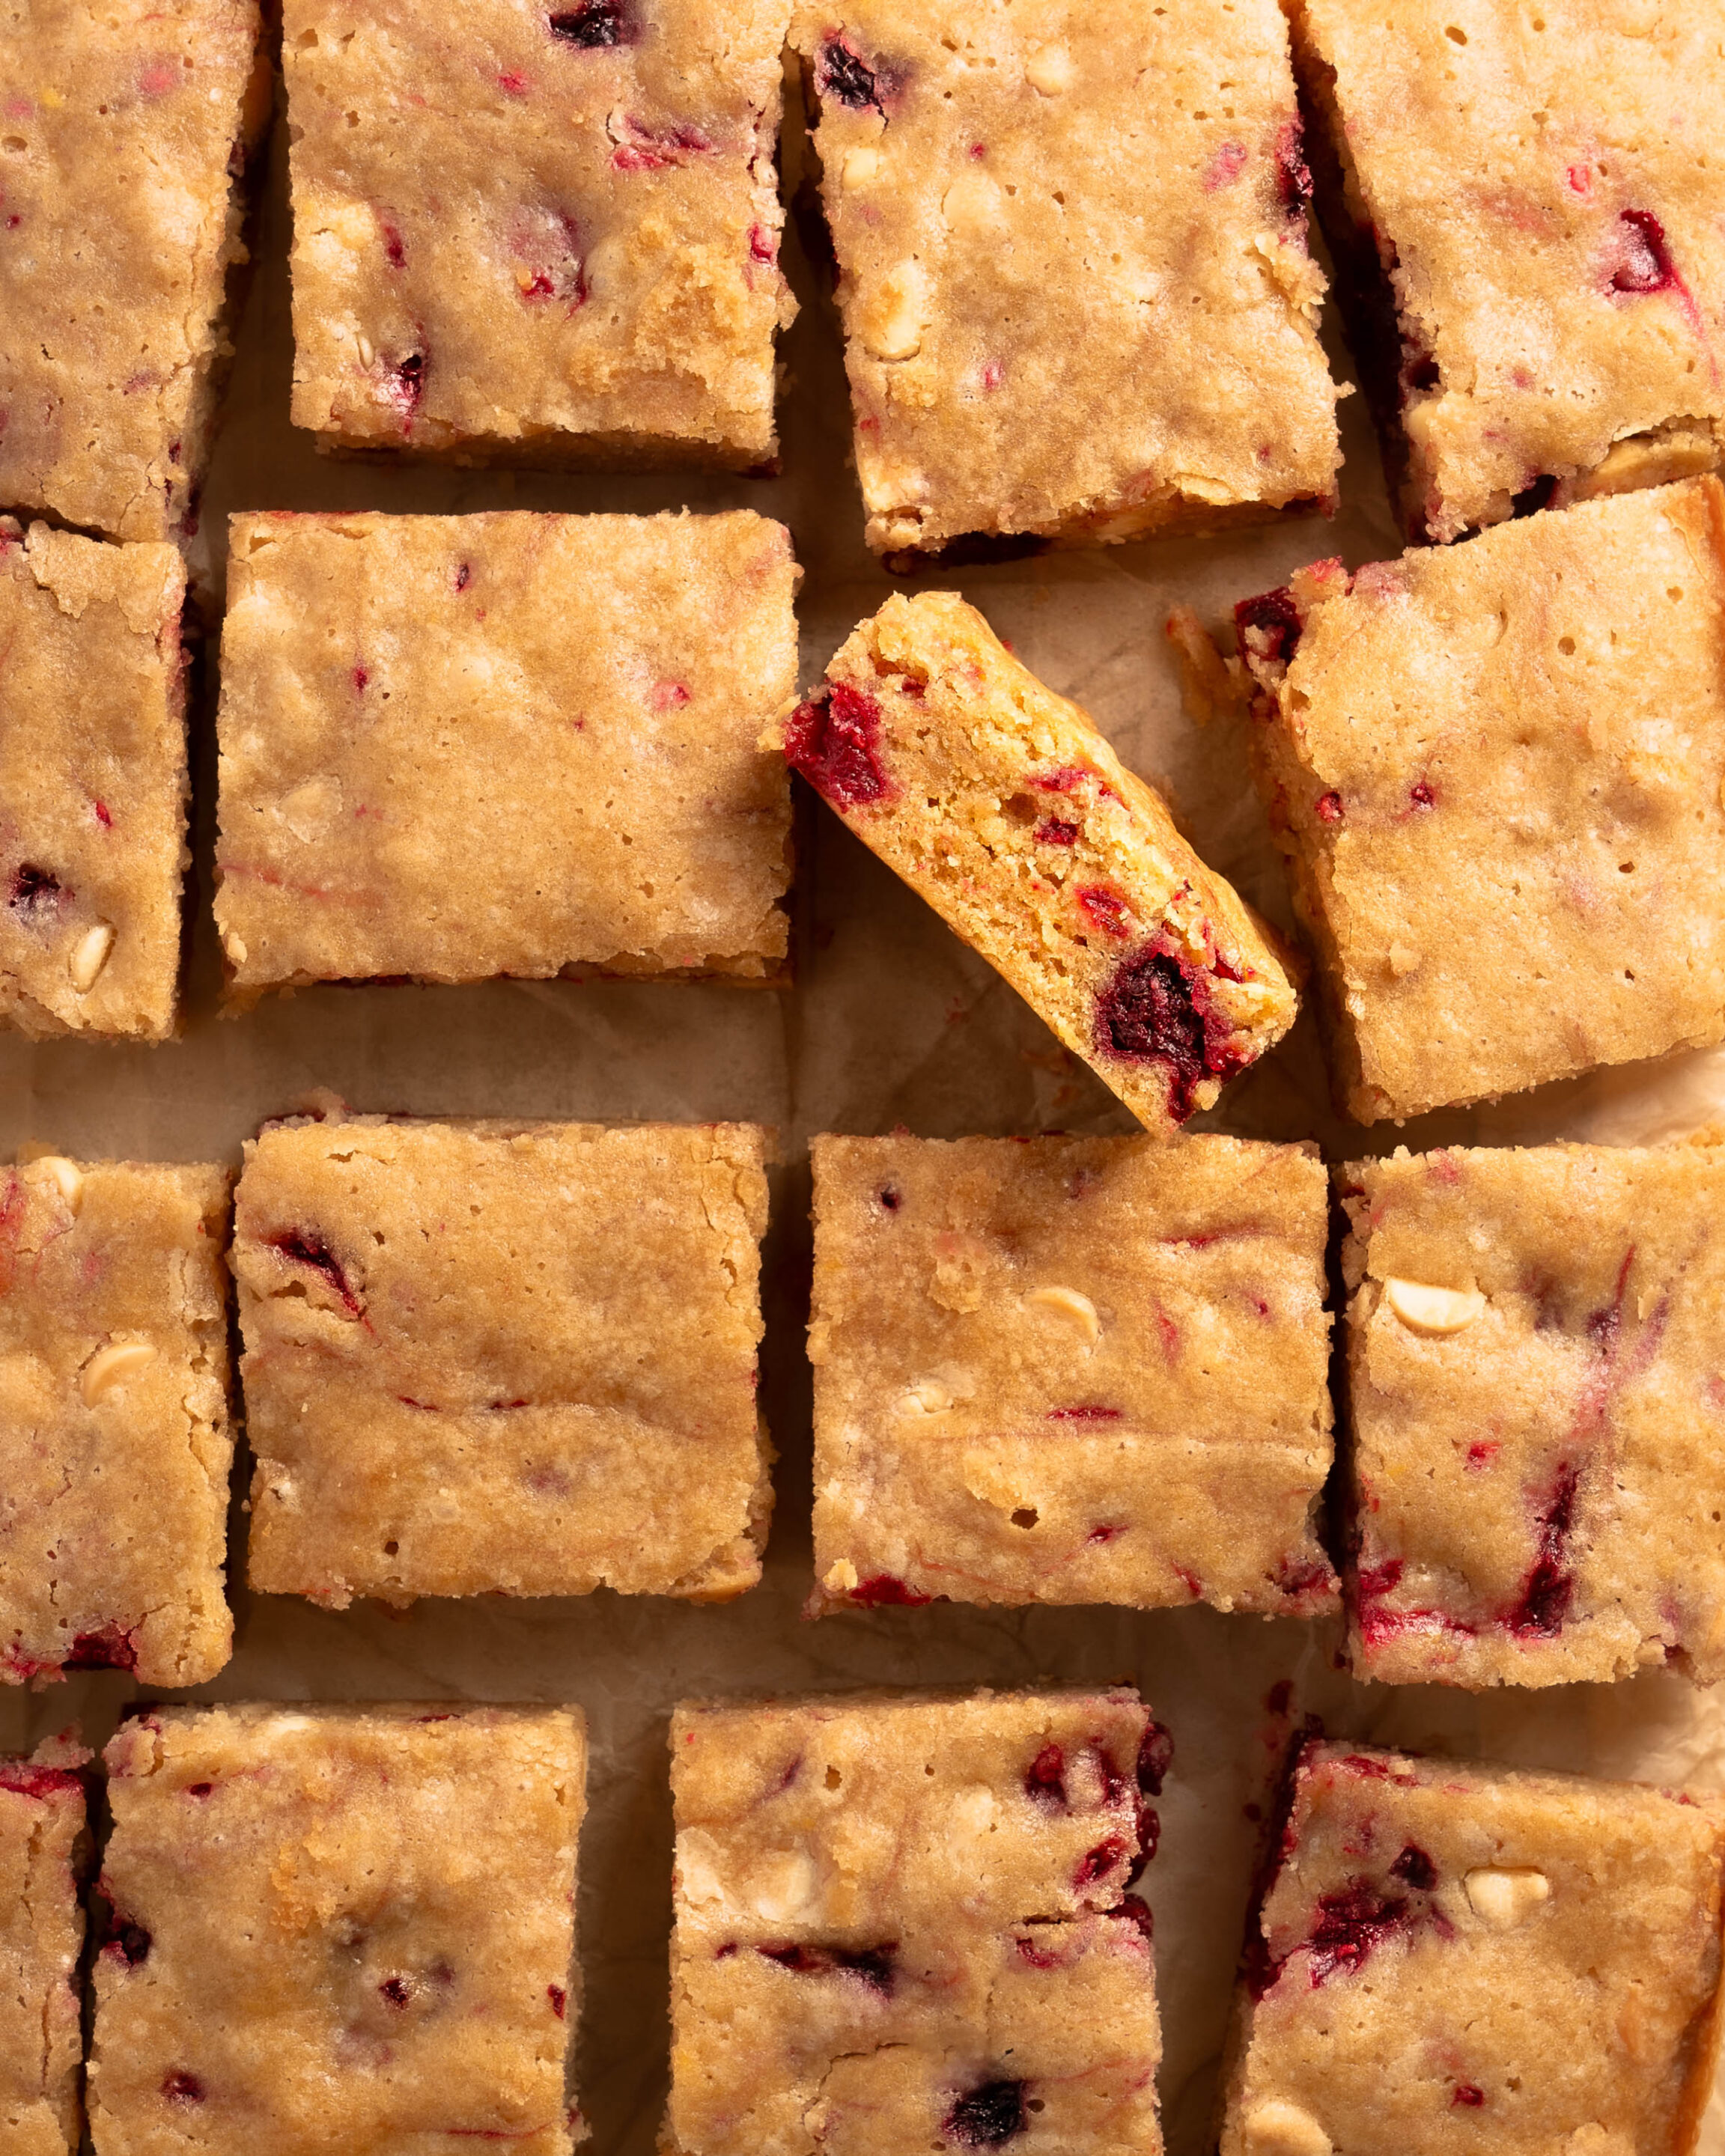 Raspberry White Chocolate Blondies on a wire wrack covered in light brown parchment paper. One blondie is turned on its side to show the chunks of raspberry and white chocolate.